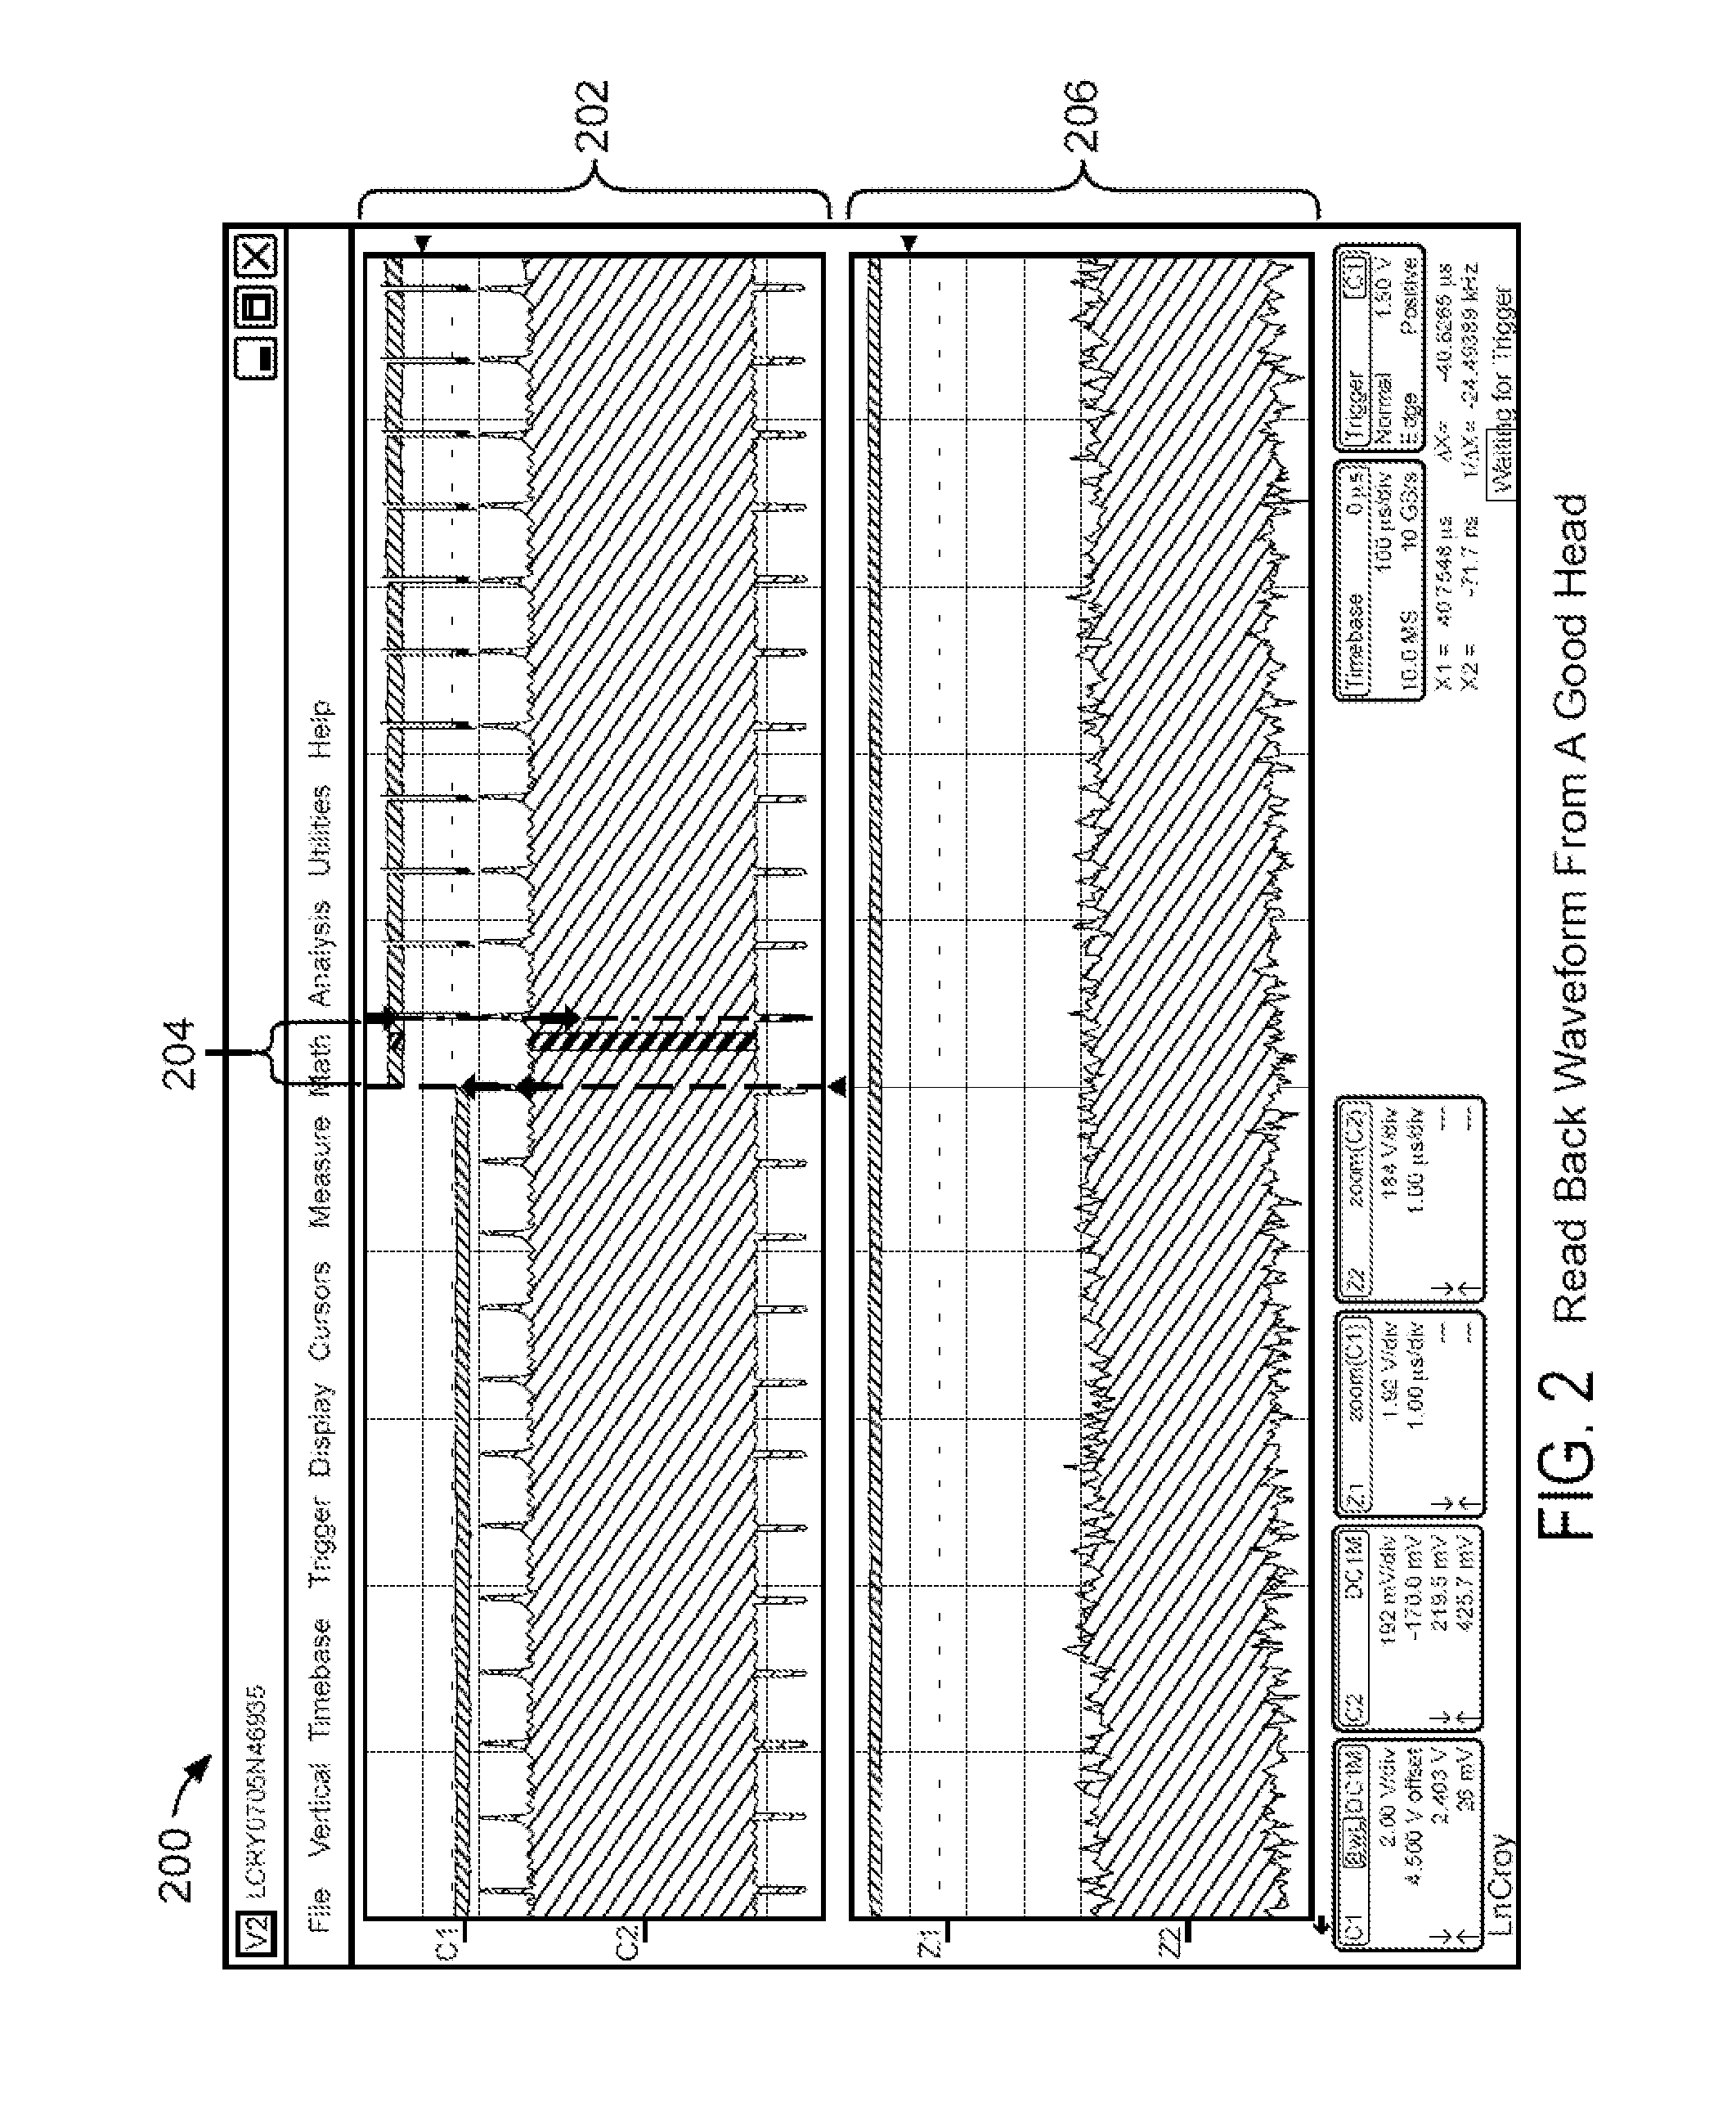 Systems and methods for storage device read/write head malfunction detection